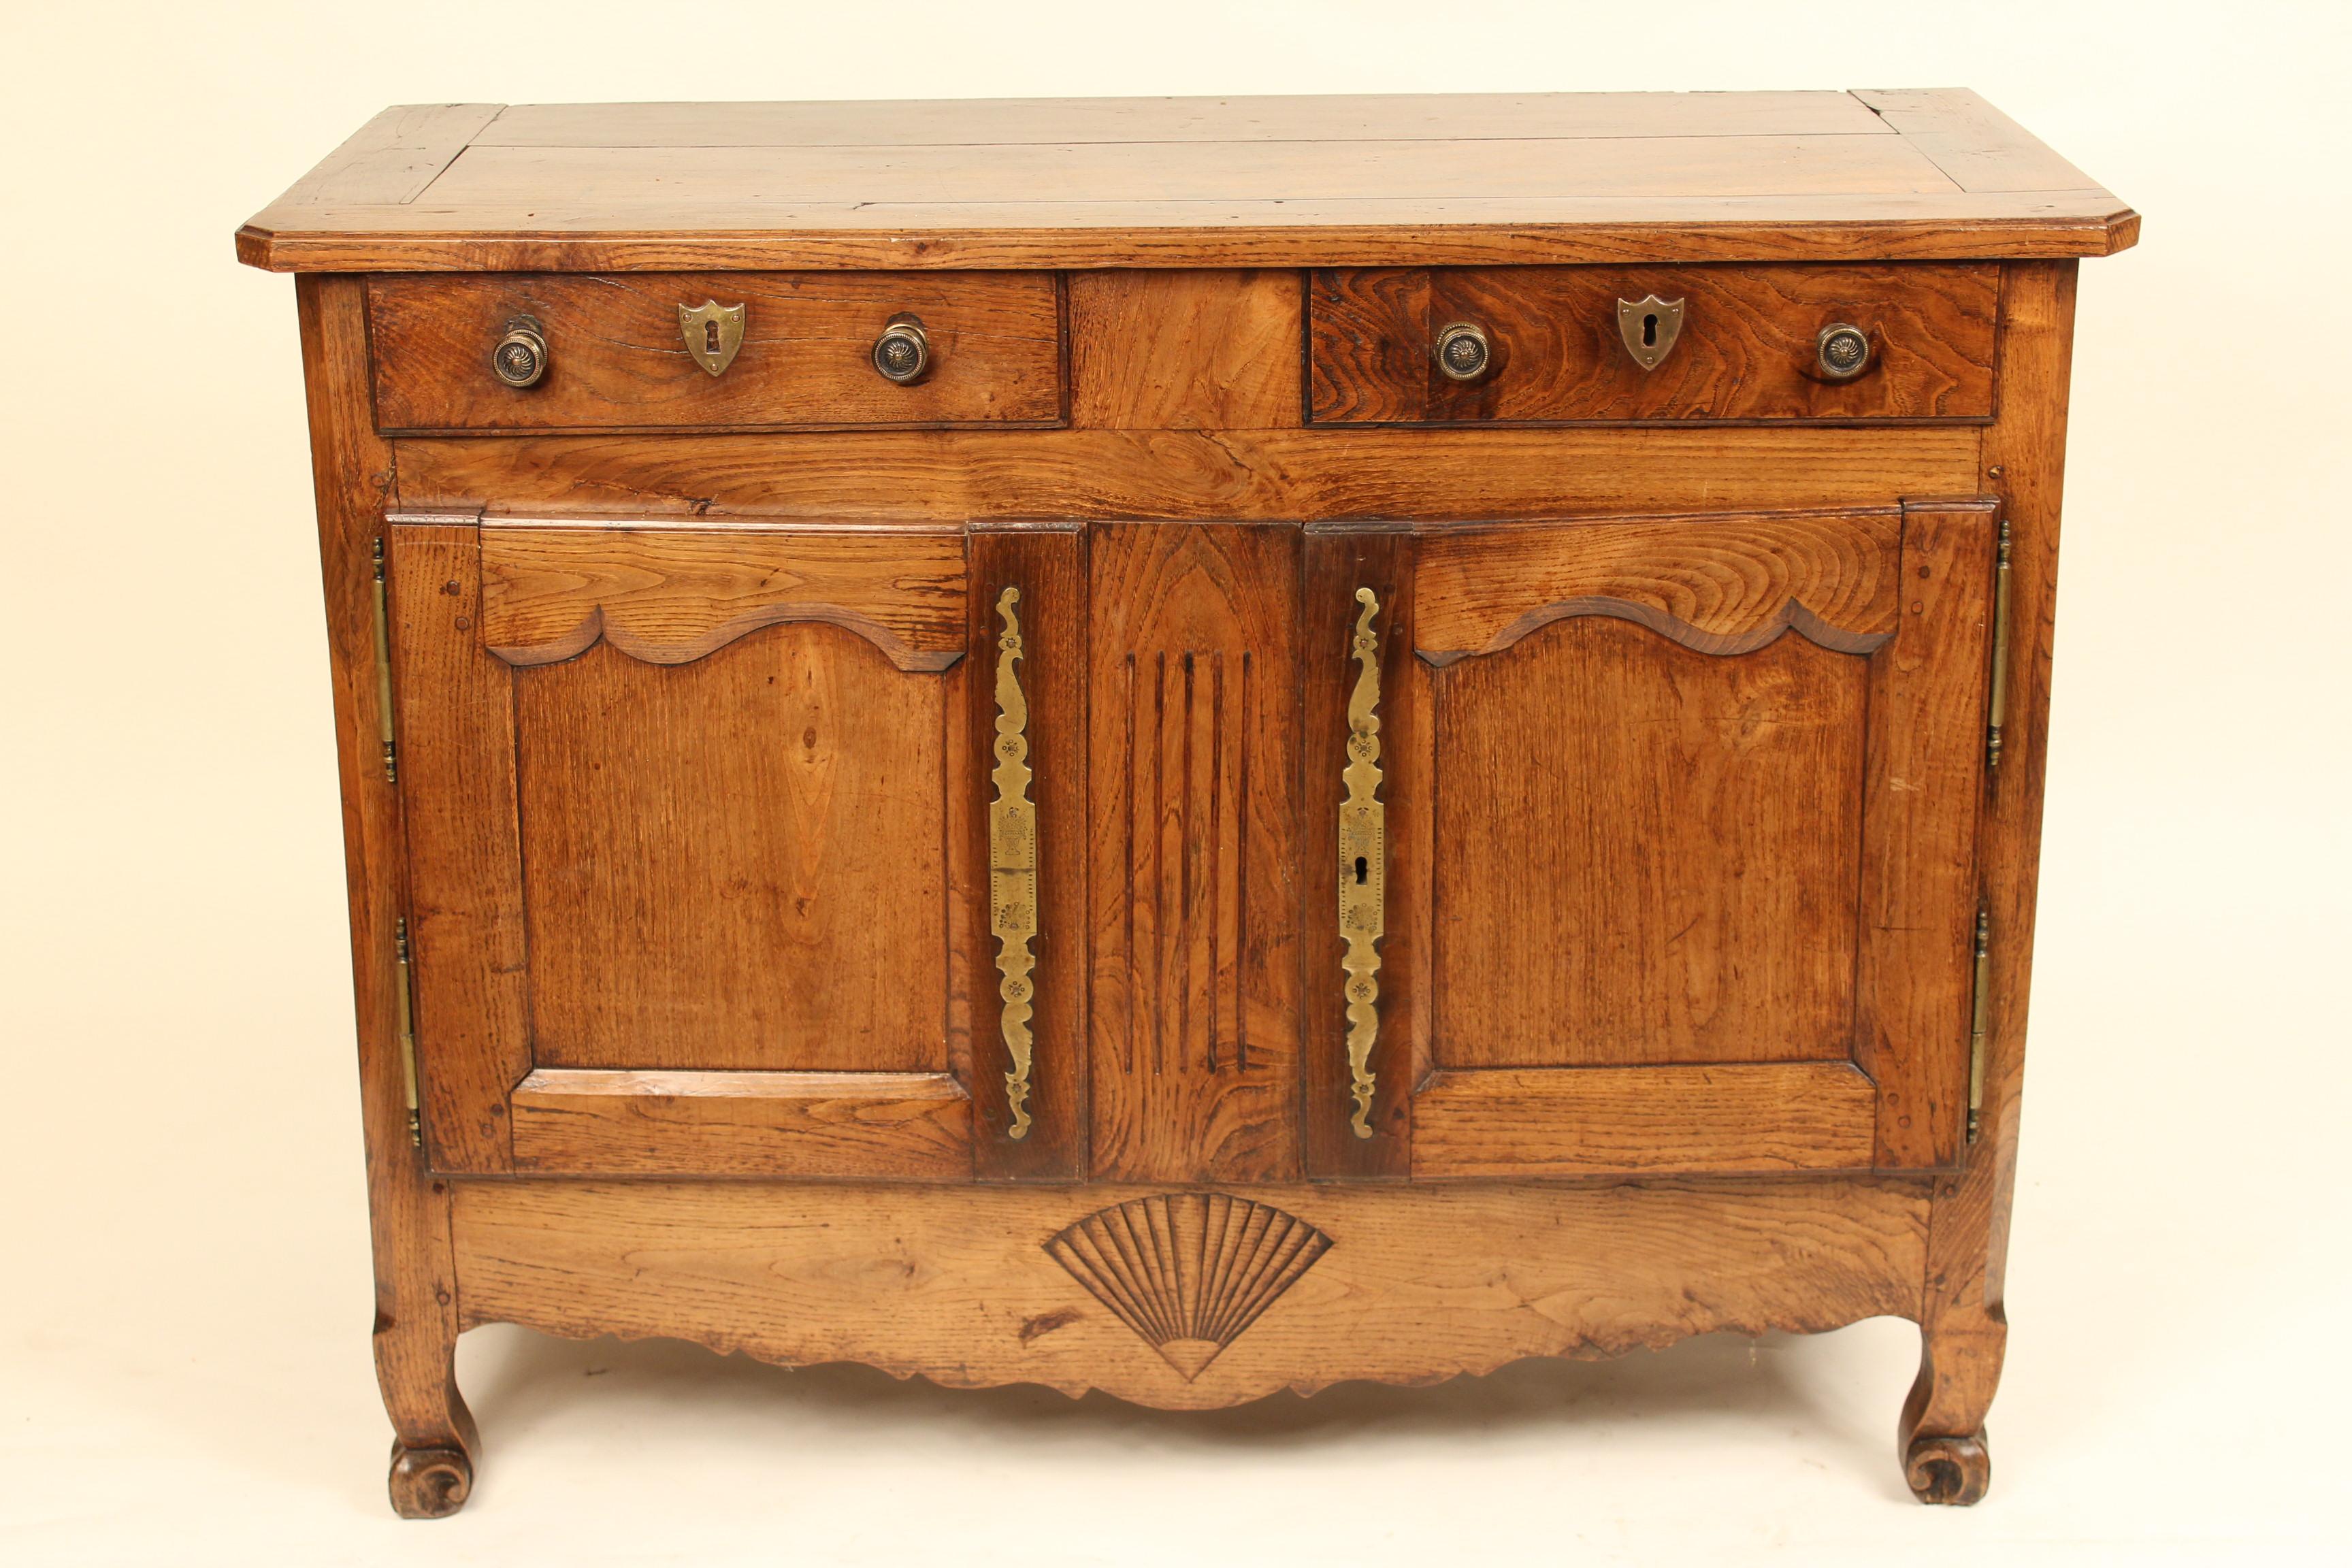 Louis XV provincial oak and walnut buffet, early 19th century. Very usable buffet with excellent color, mortise and tenon construction, decorative brass escutcheons, and French fiddle feet. Drawer bottoms and sides rebuilt.